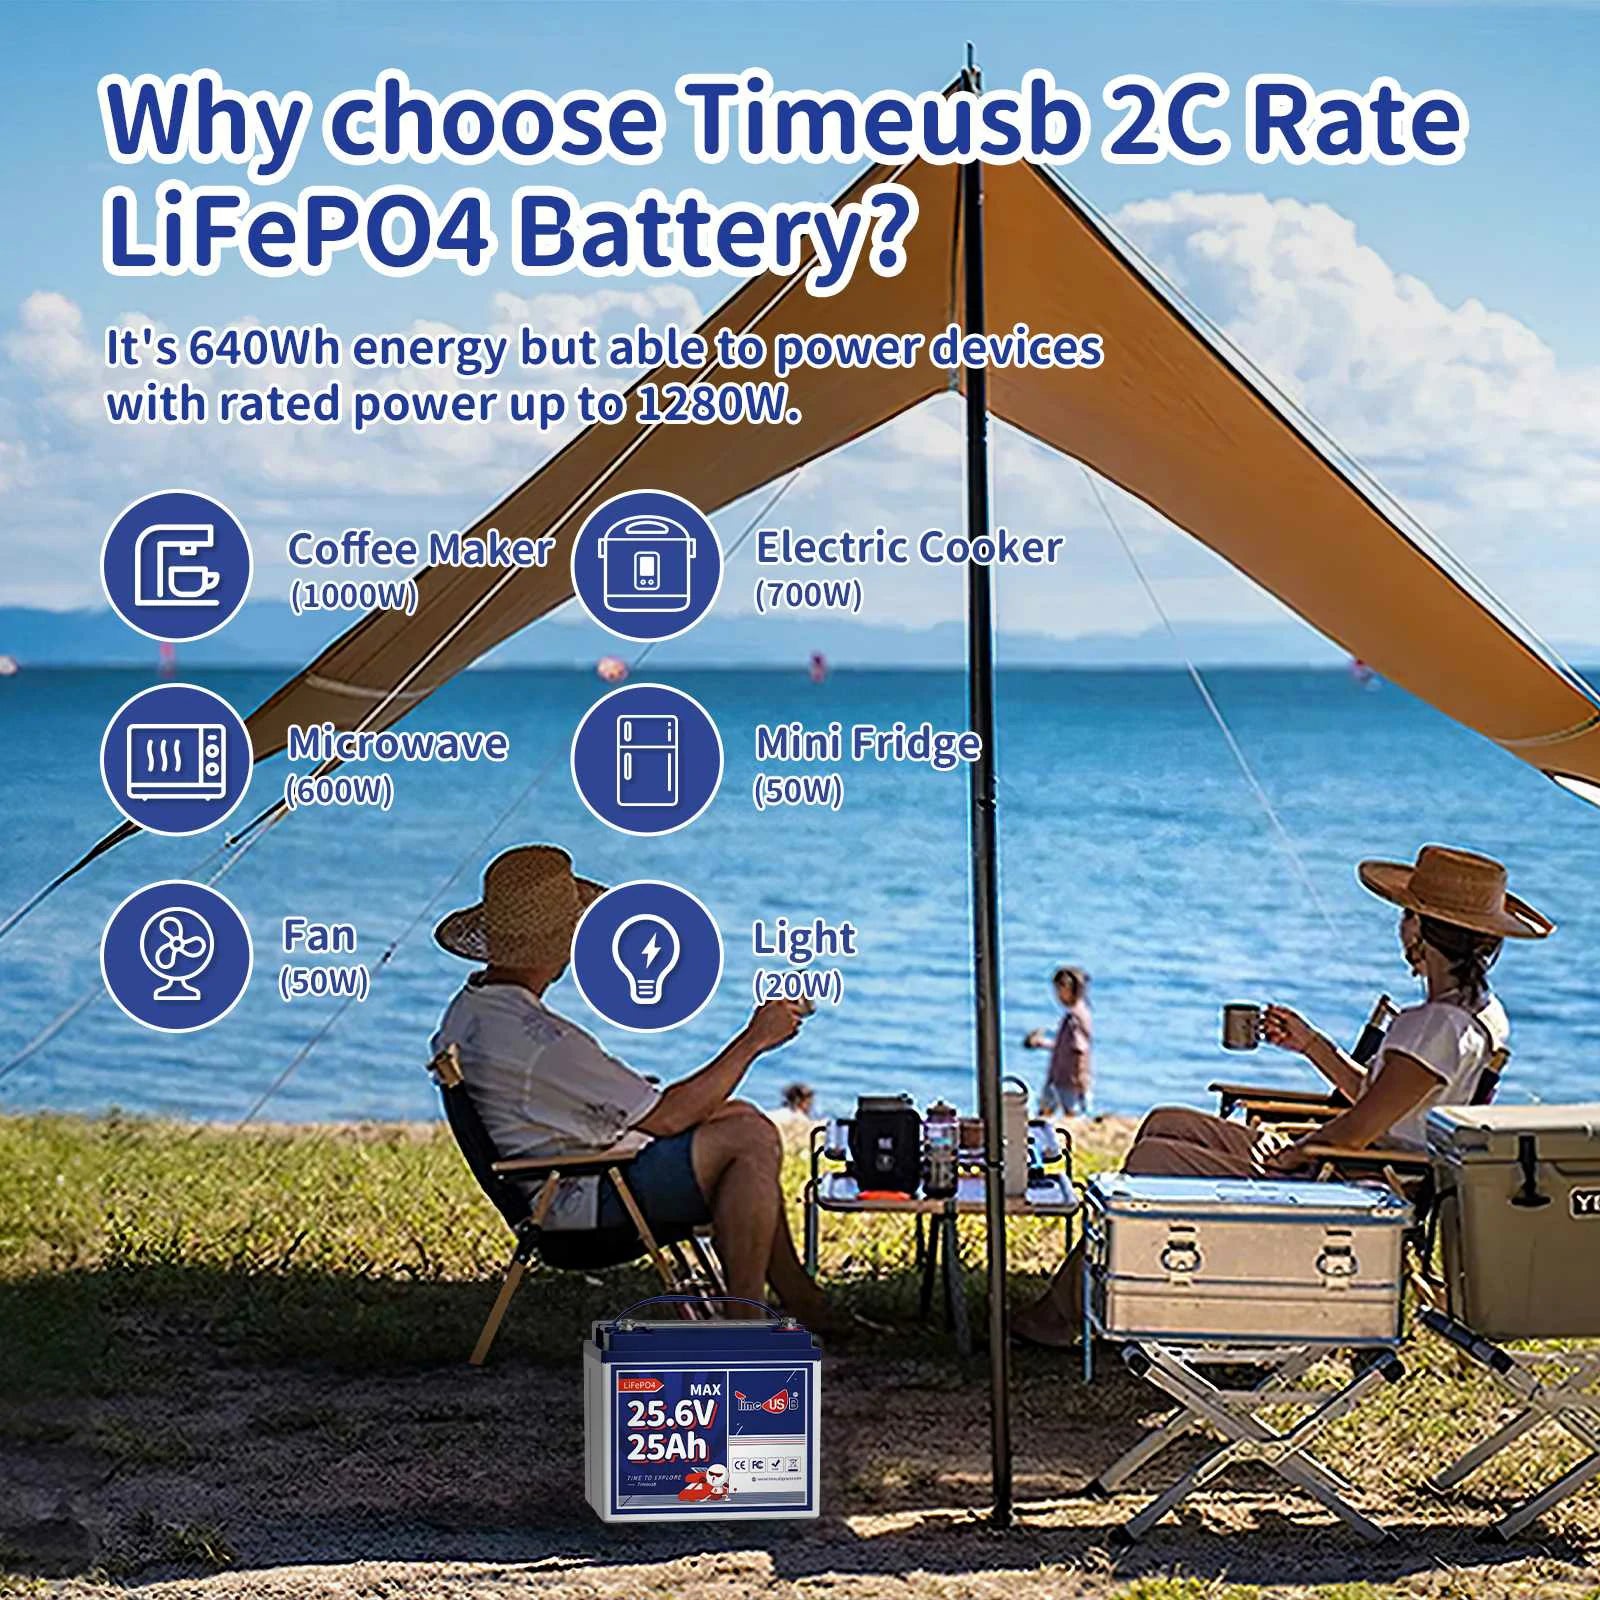 24V 25Ah LiFePO4 Battery, 2C High Discharge Rate Built-in 50A BMS 640Wh Deep Cycle Battery, 1280W Continuous Load Power Perfect for Farm Equipment, Mobility Scooters, Electric Wheelchairs etc